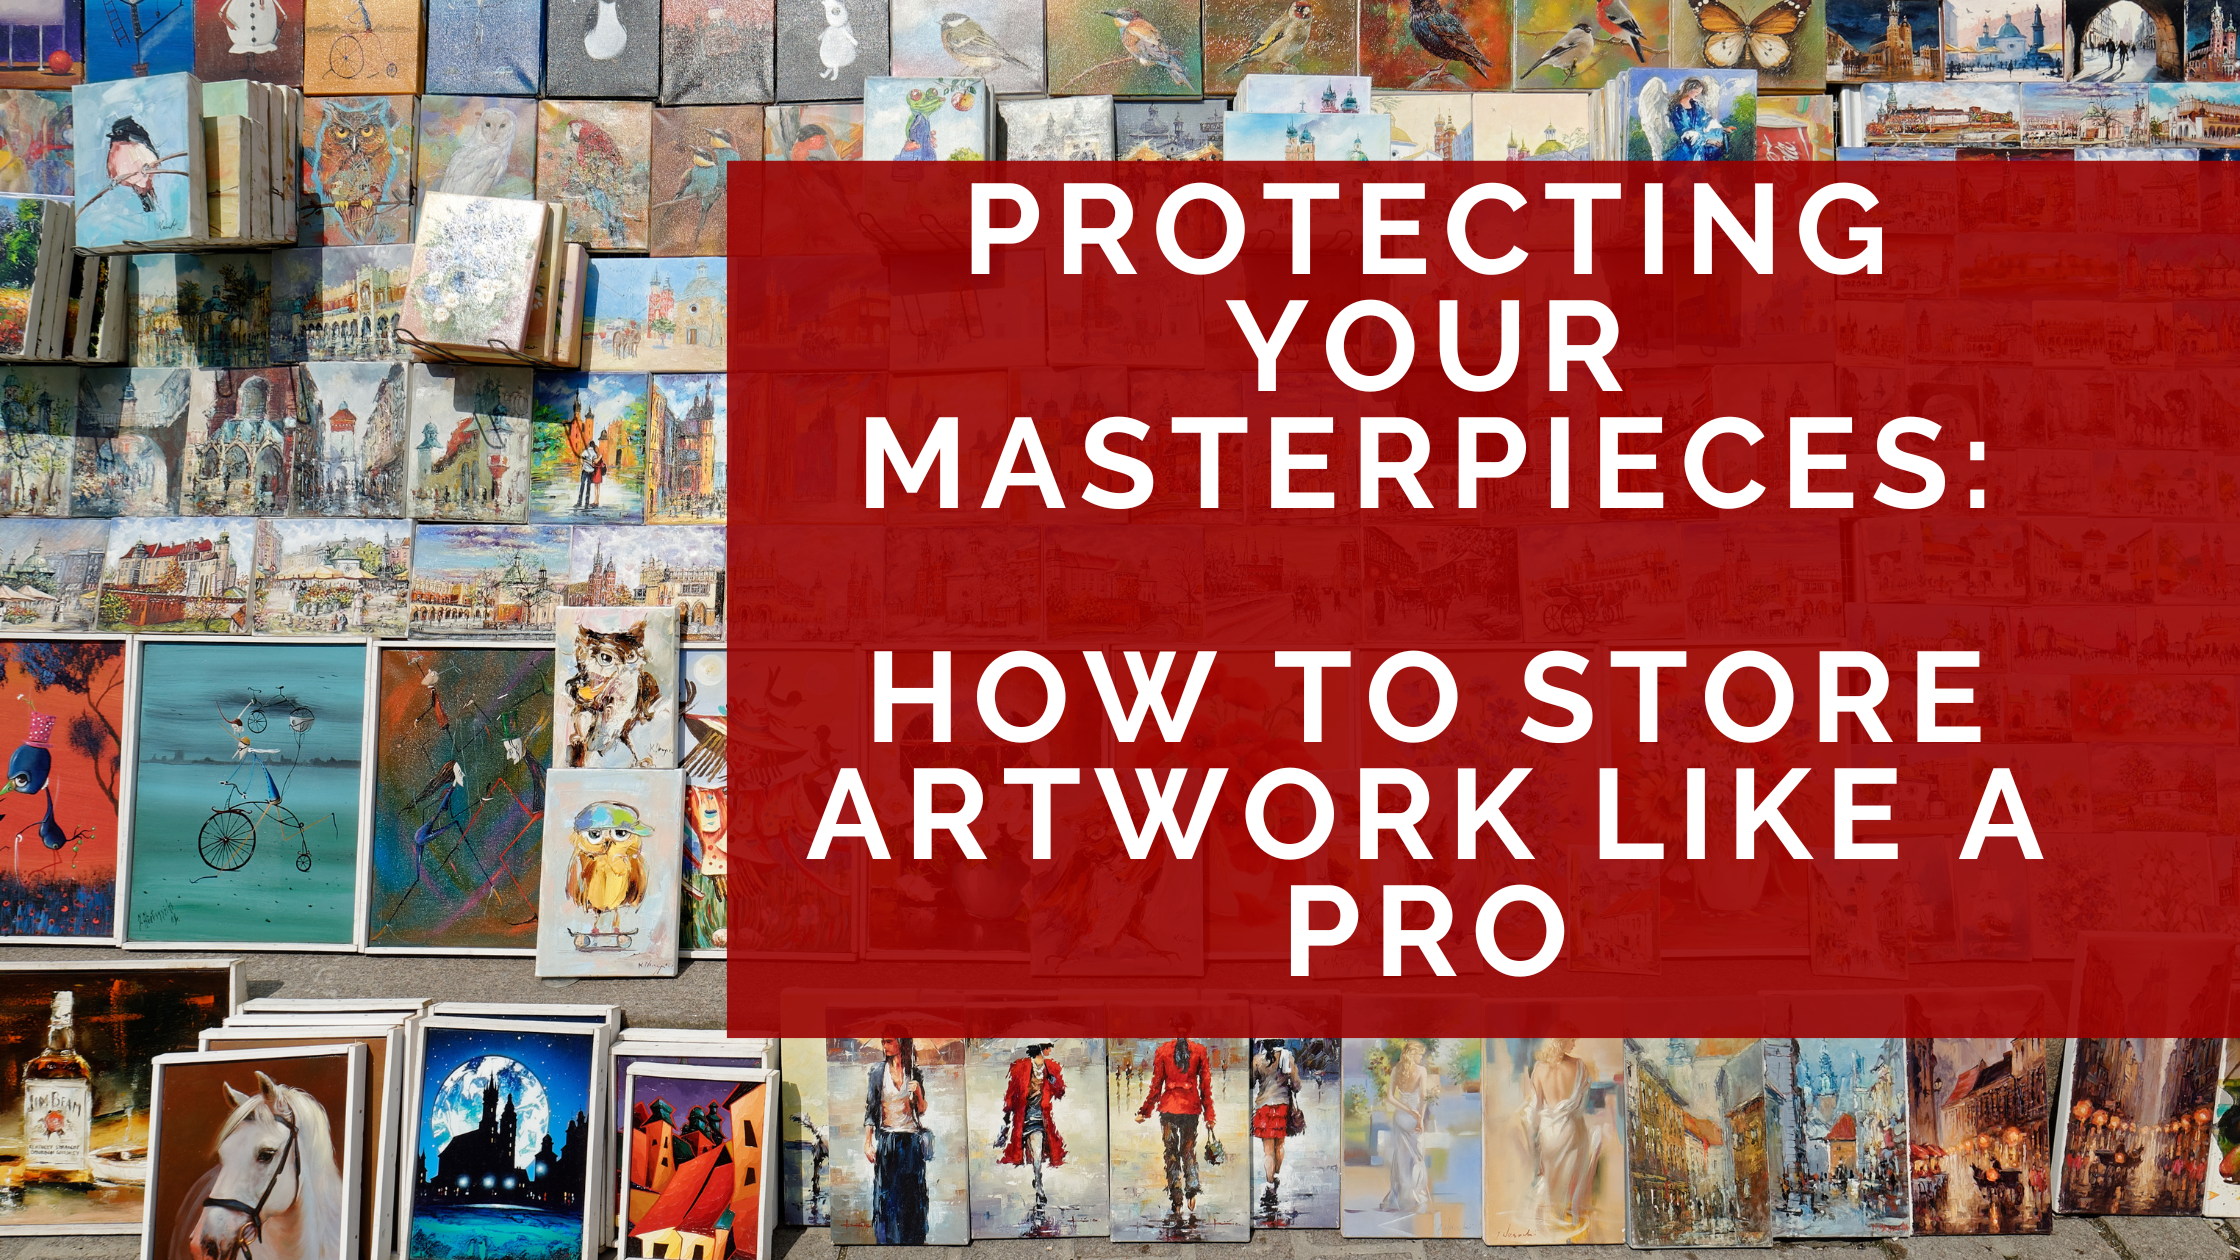 Protecting Your Masterpieces: How to Store Artwork Like a Pro - RedDotBlog